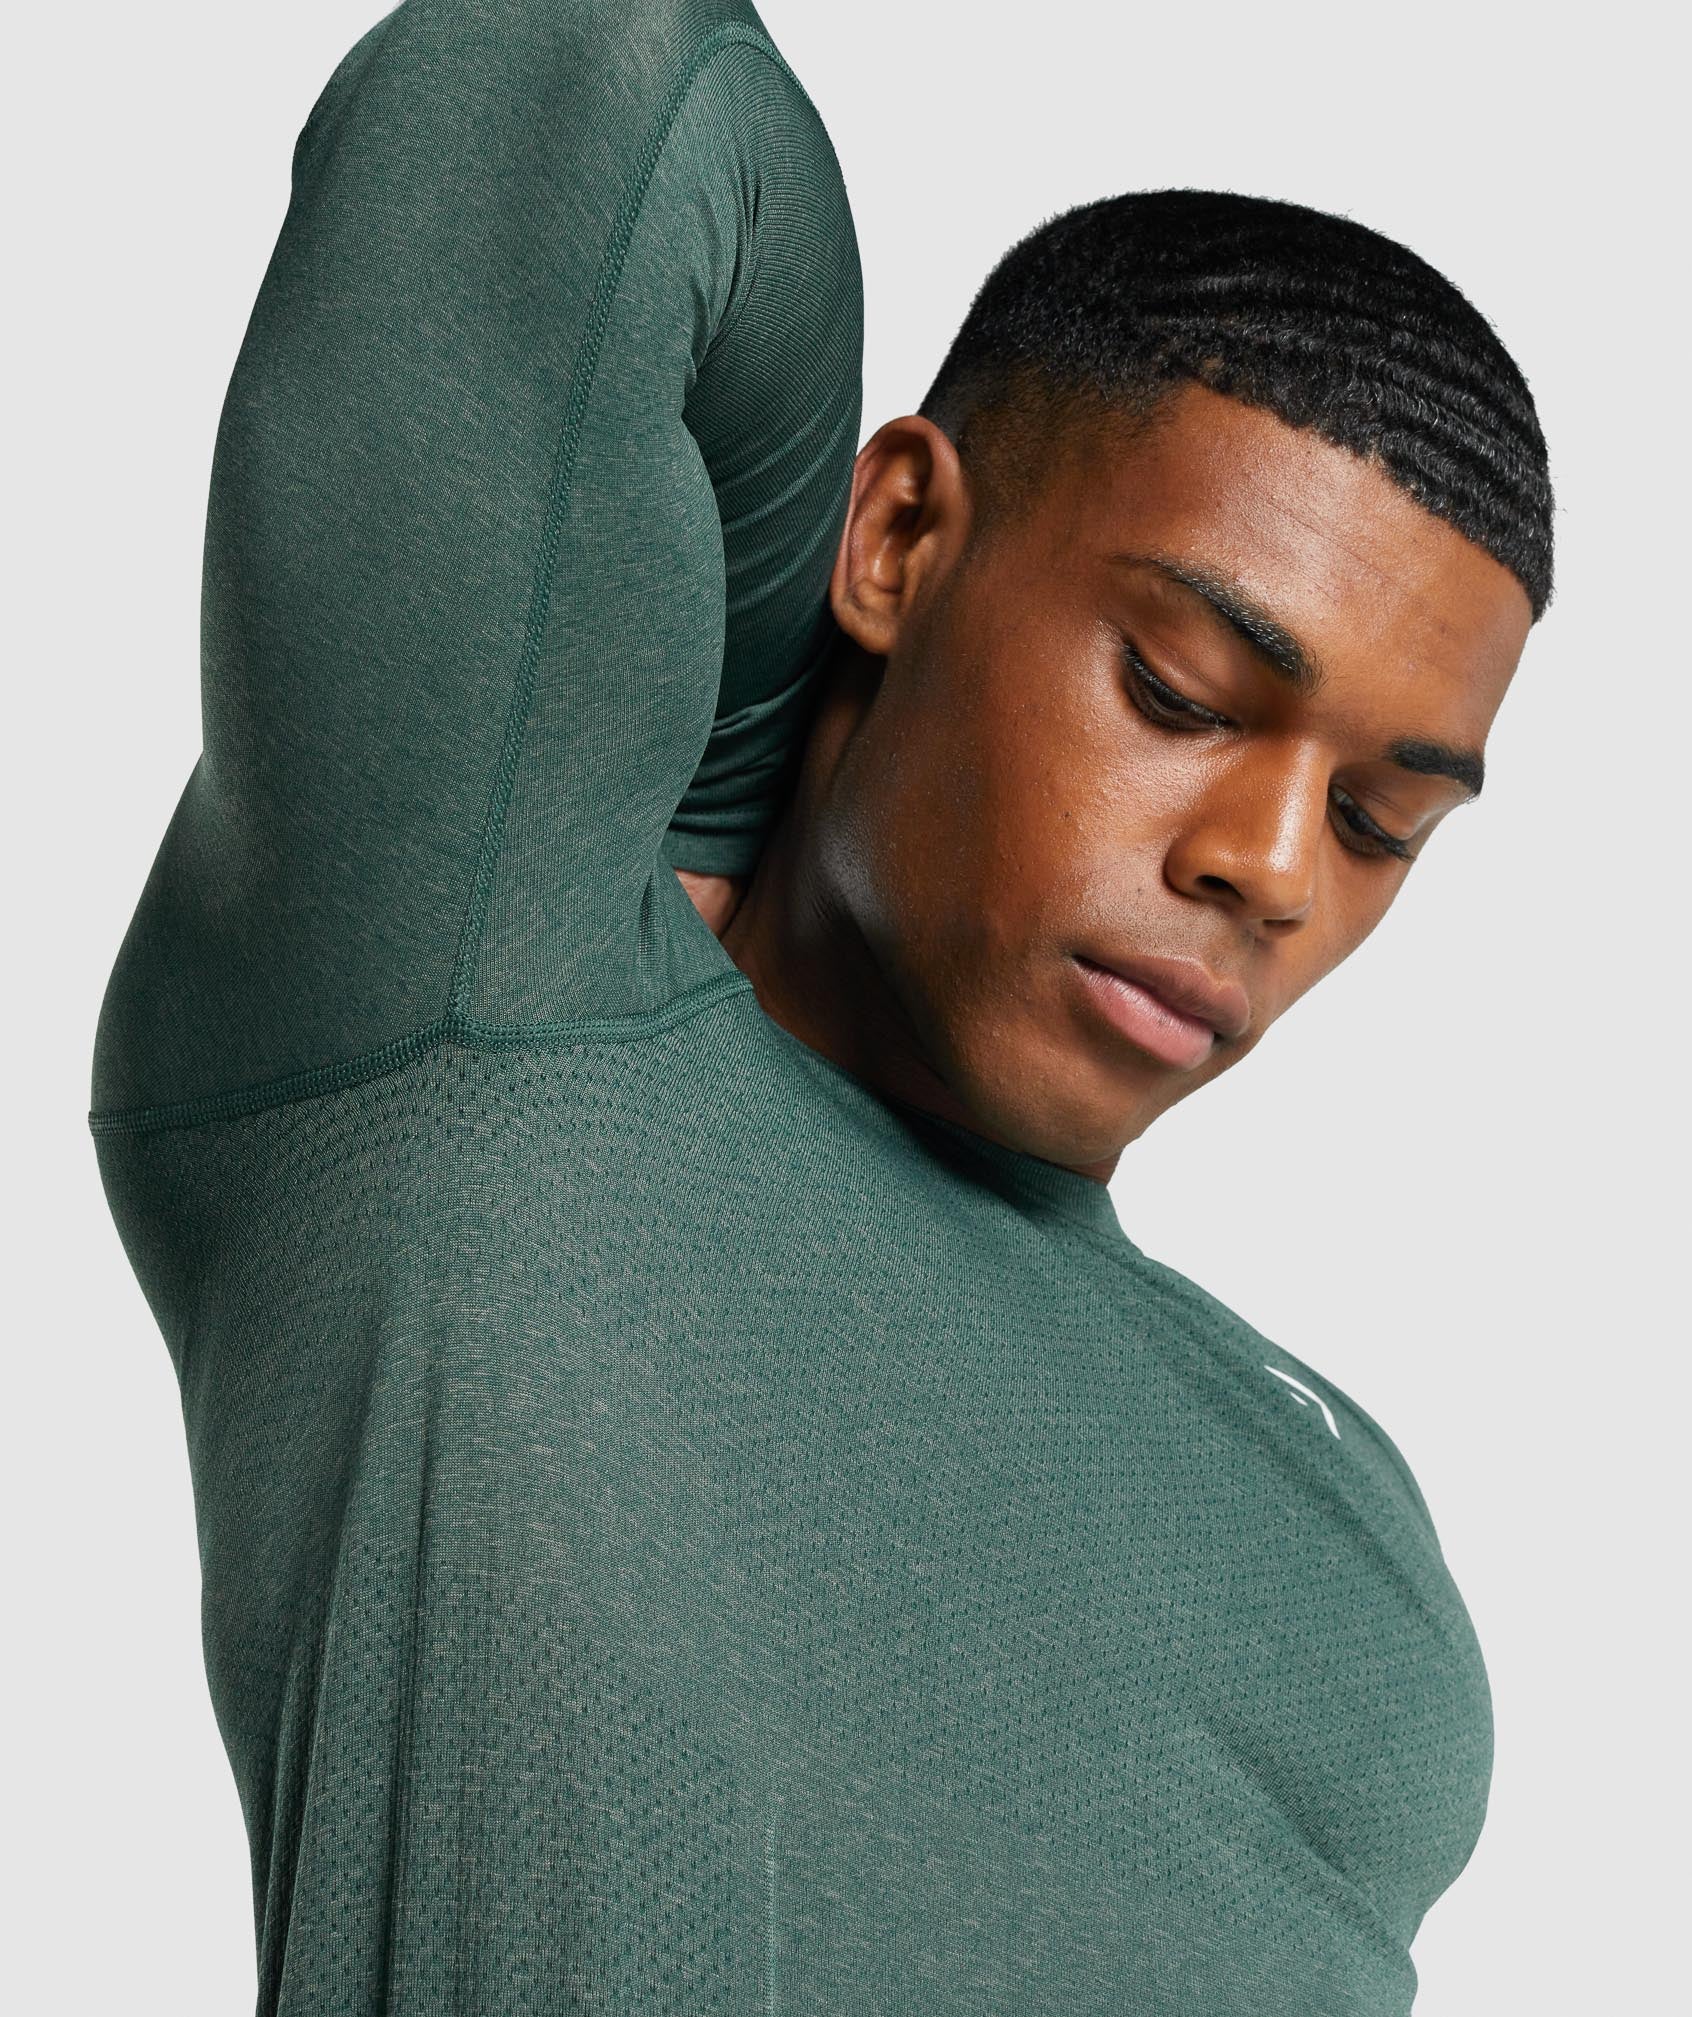 Gymshark Vital seamless 2.0 light long sleeve top Green Size L - $17 (57%  Off Retail) - From Sofia